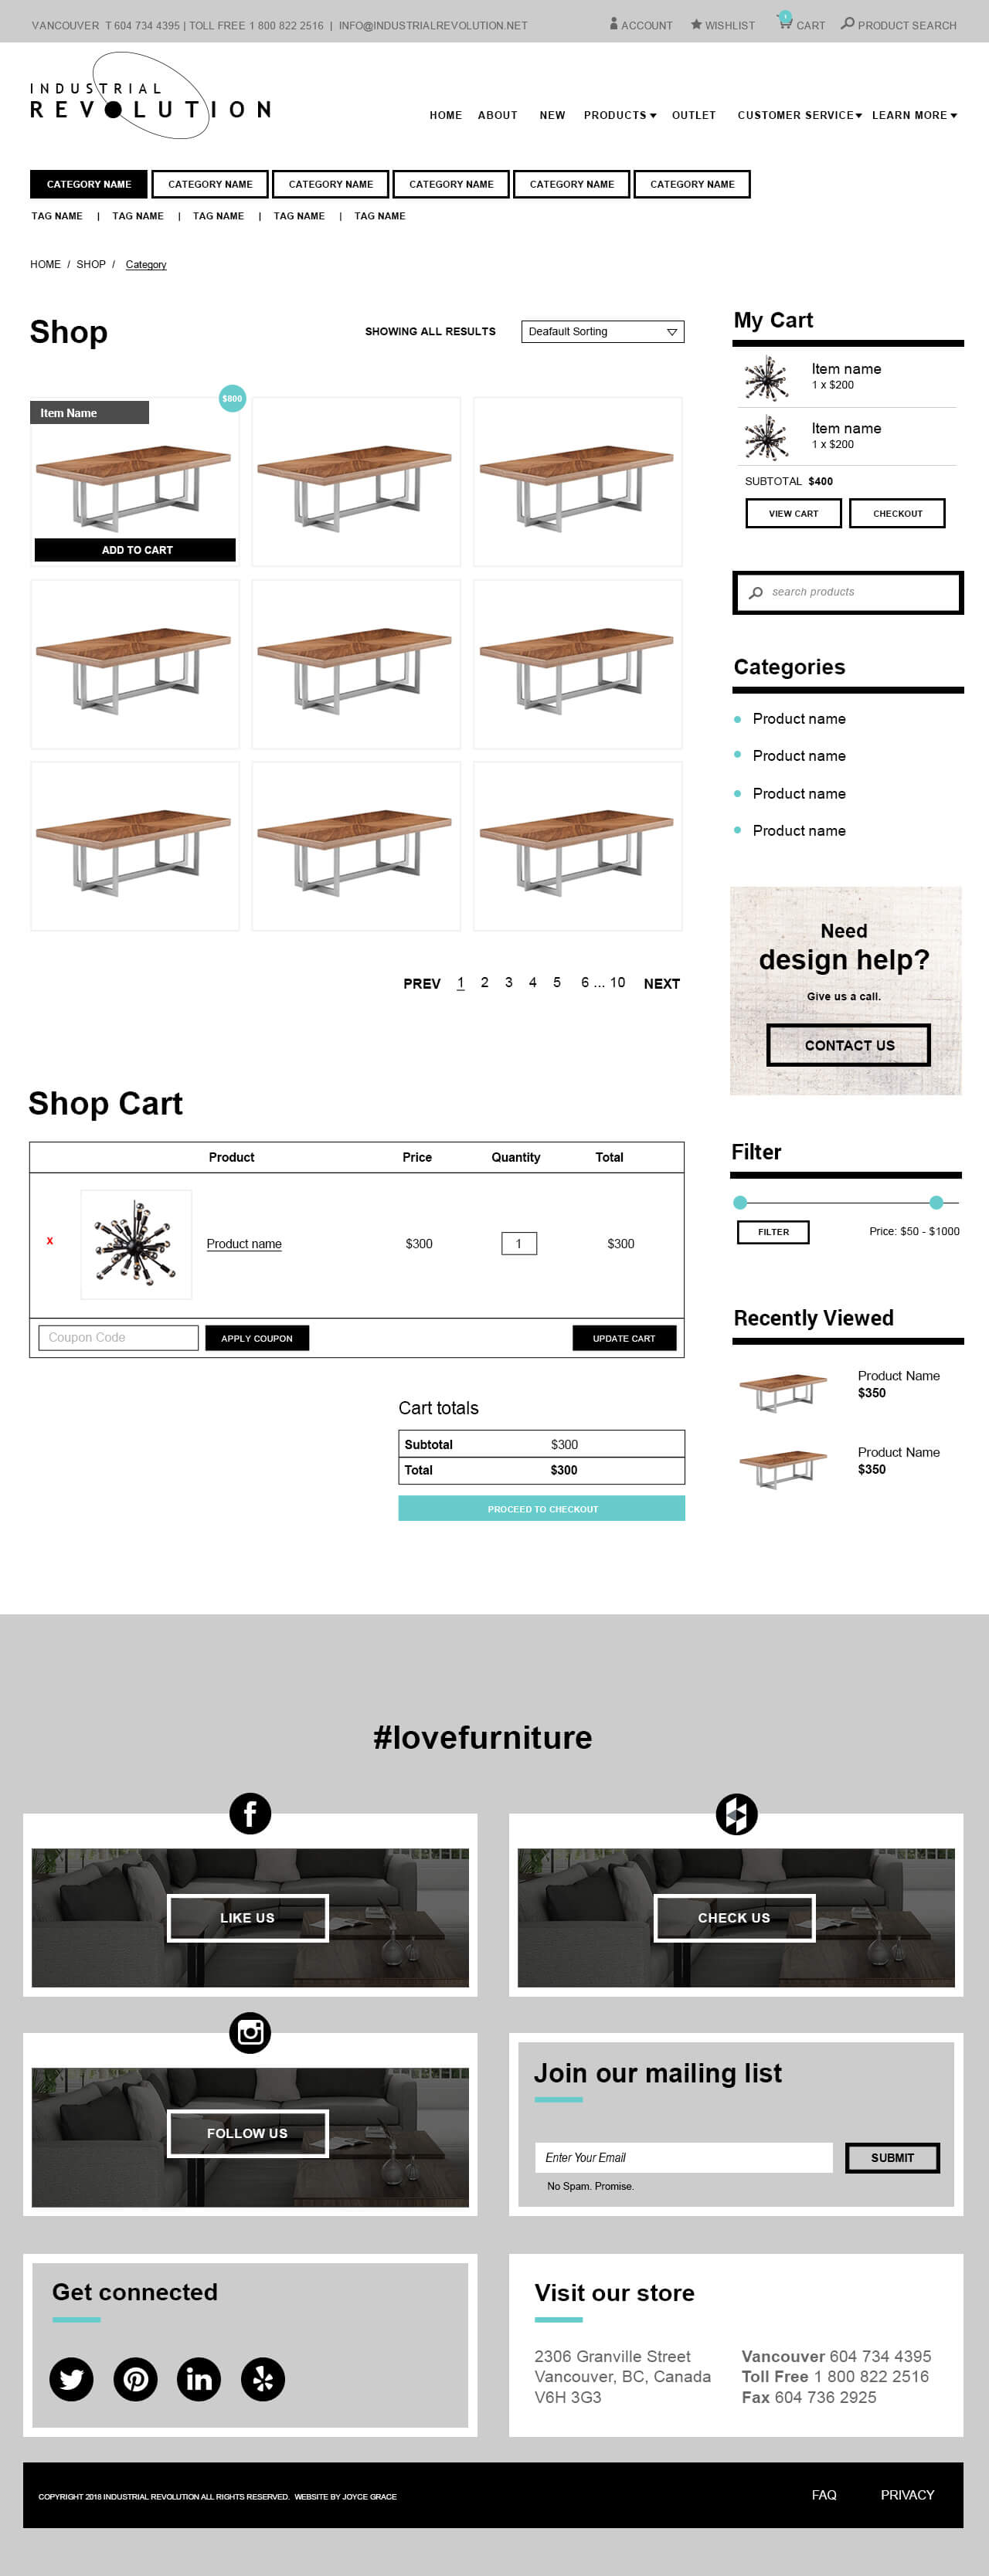 shop page using woocommerce for vancouver retail store web design